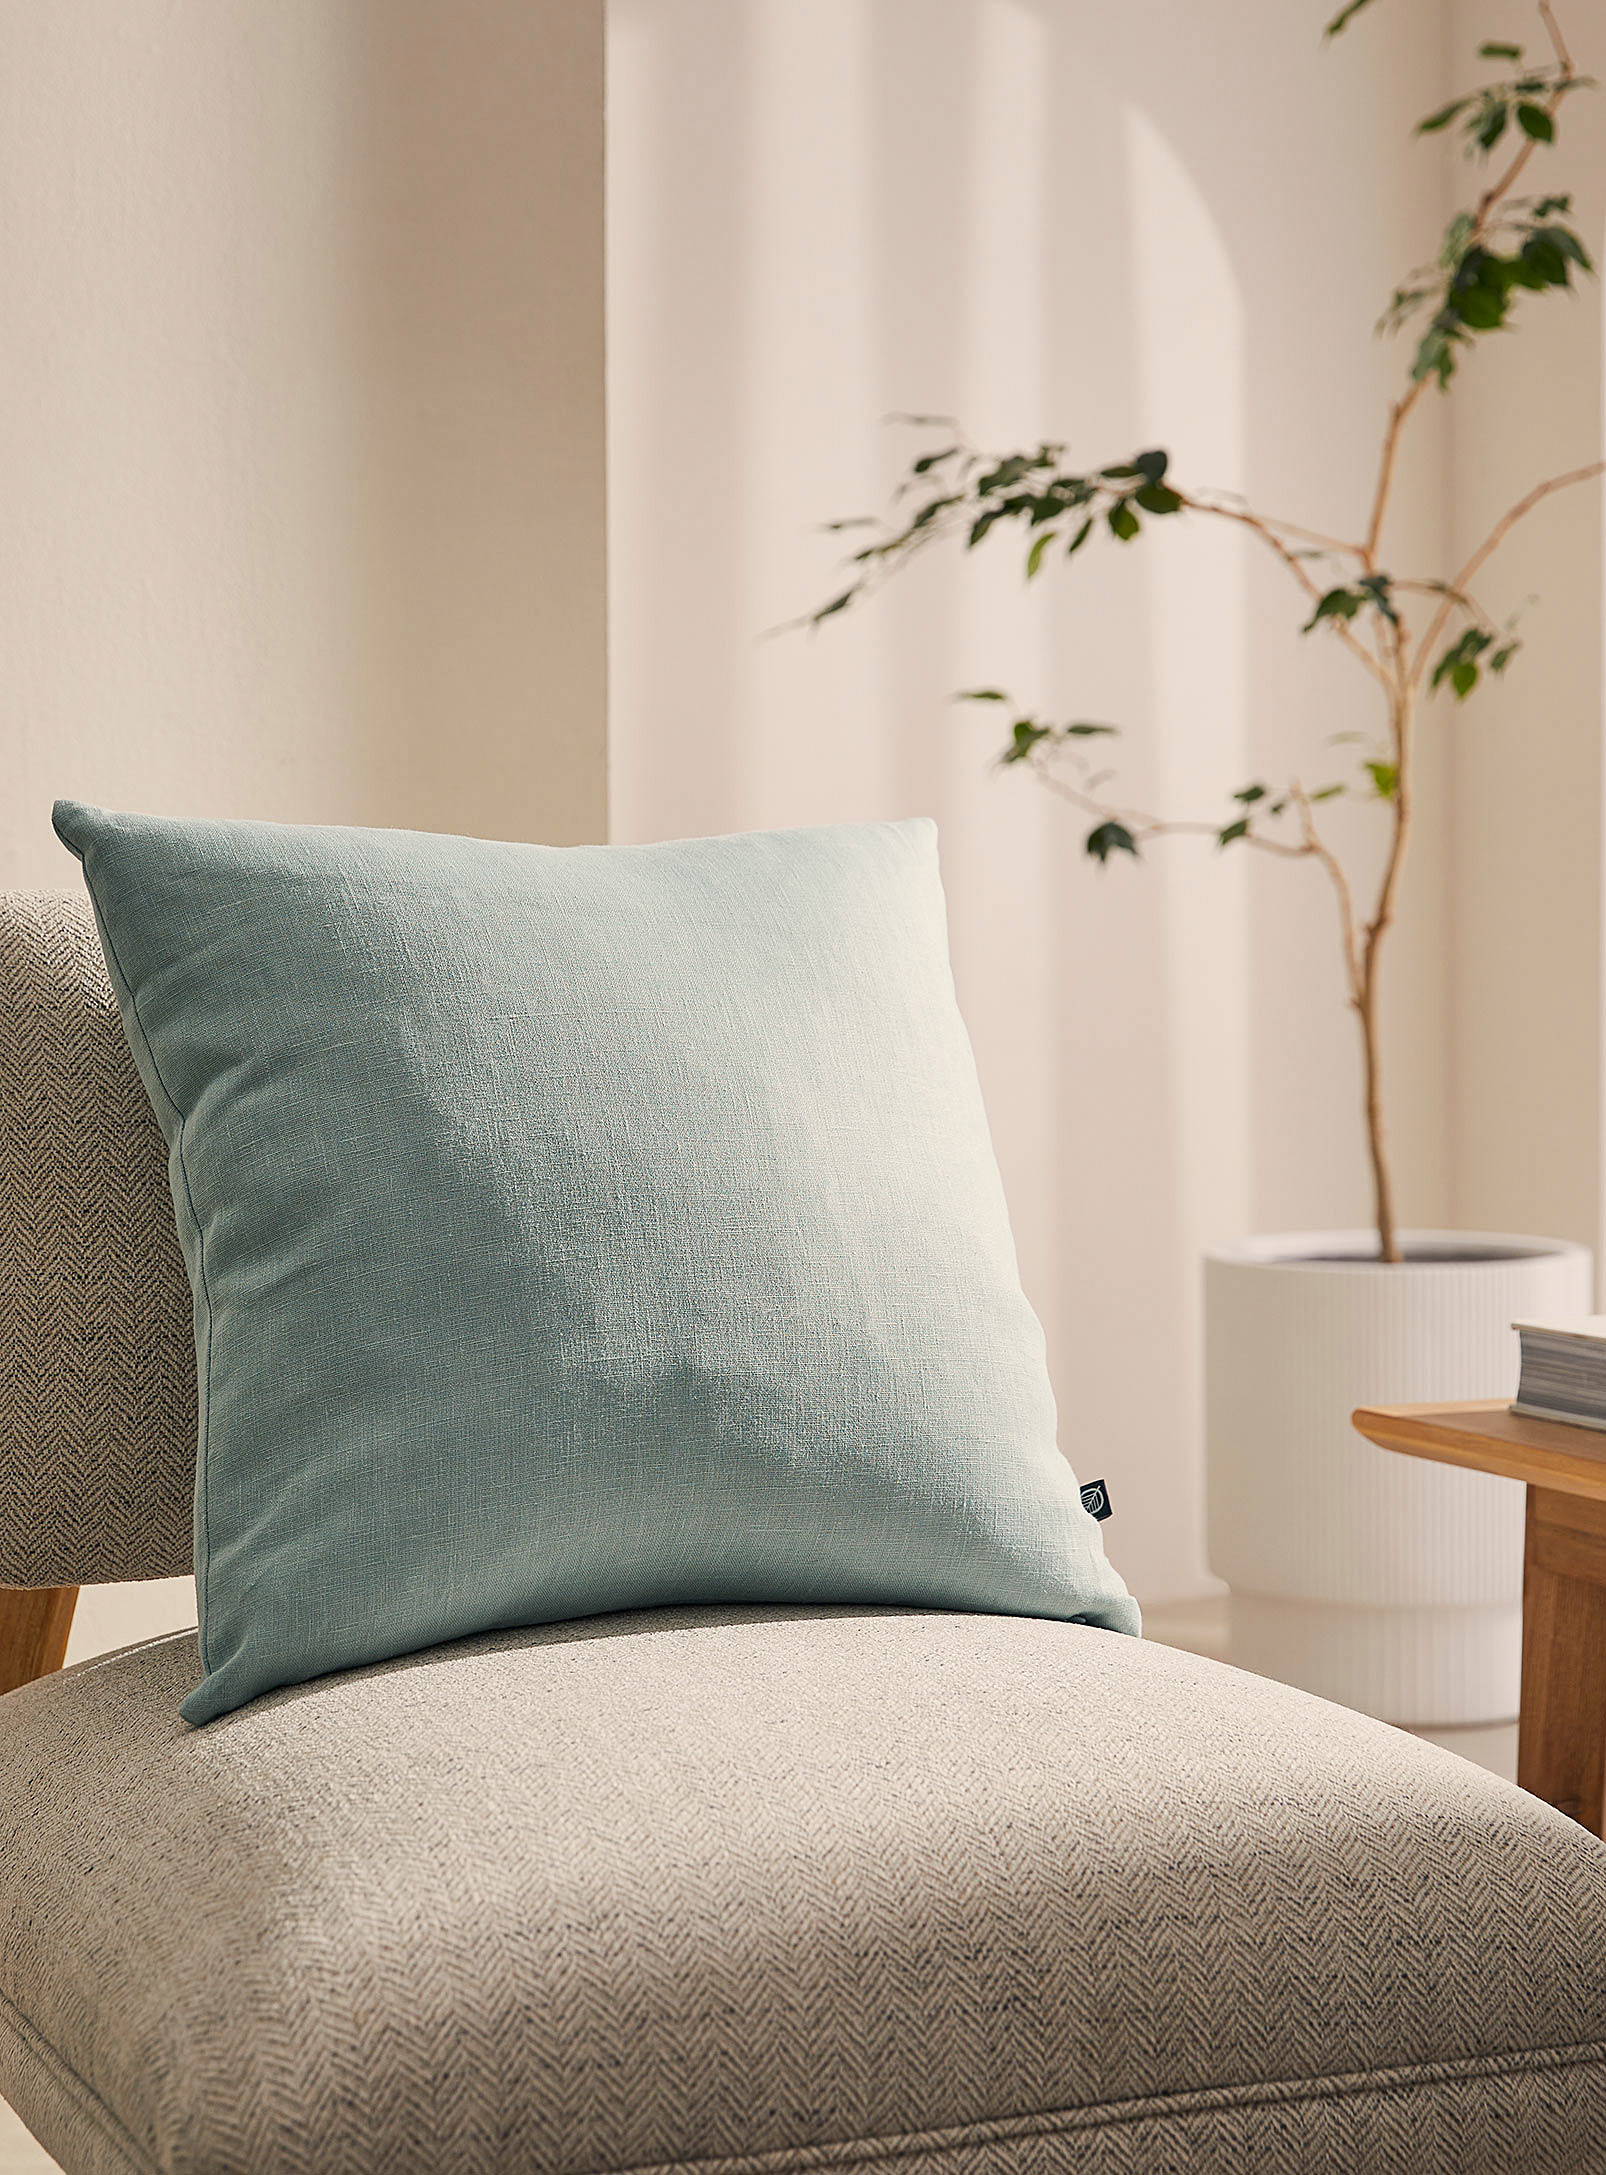 Simons Maison Solid Pure Linen Cushion 50 X 50 Cm In Teal